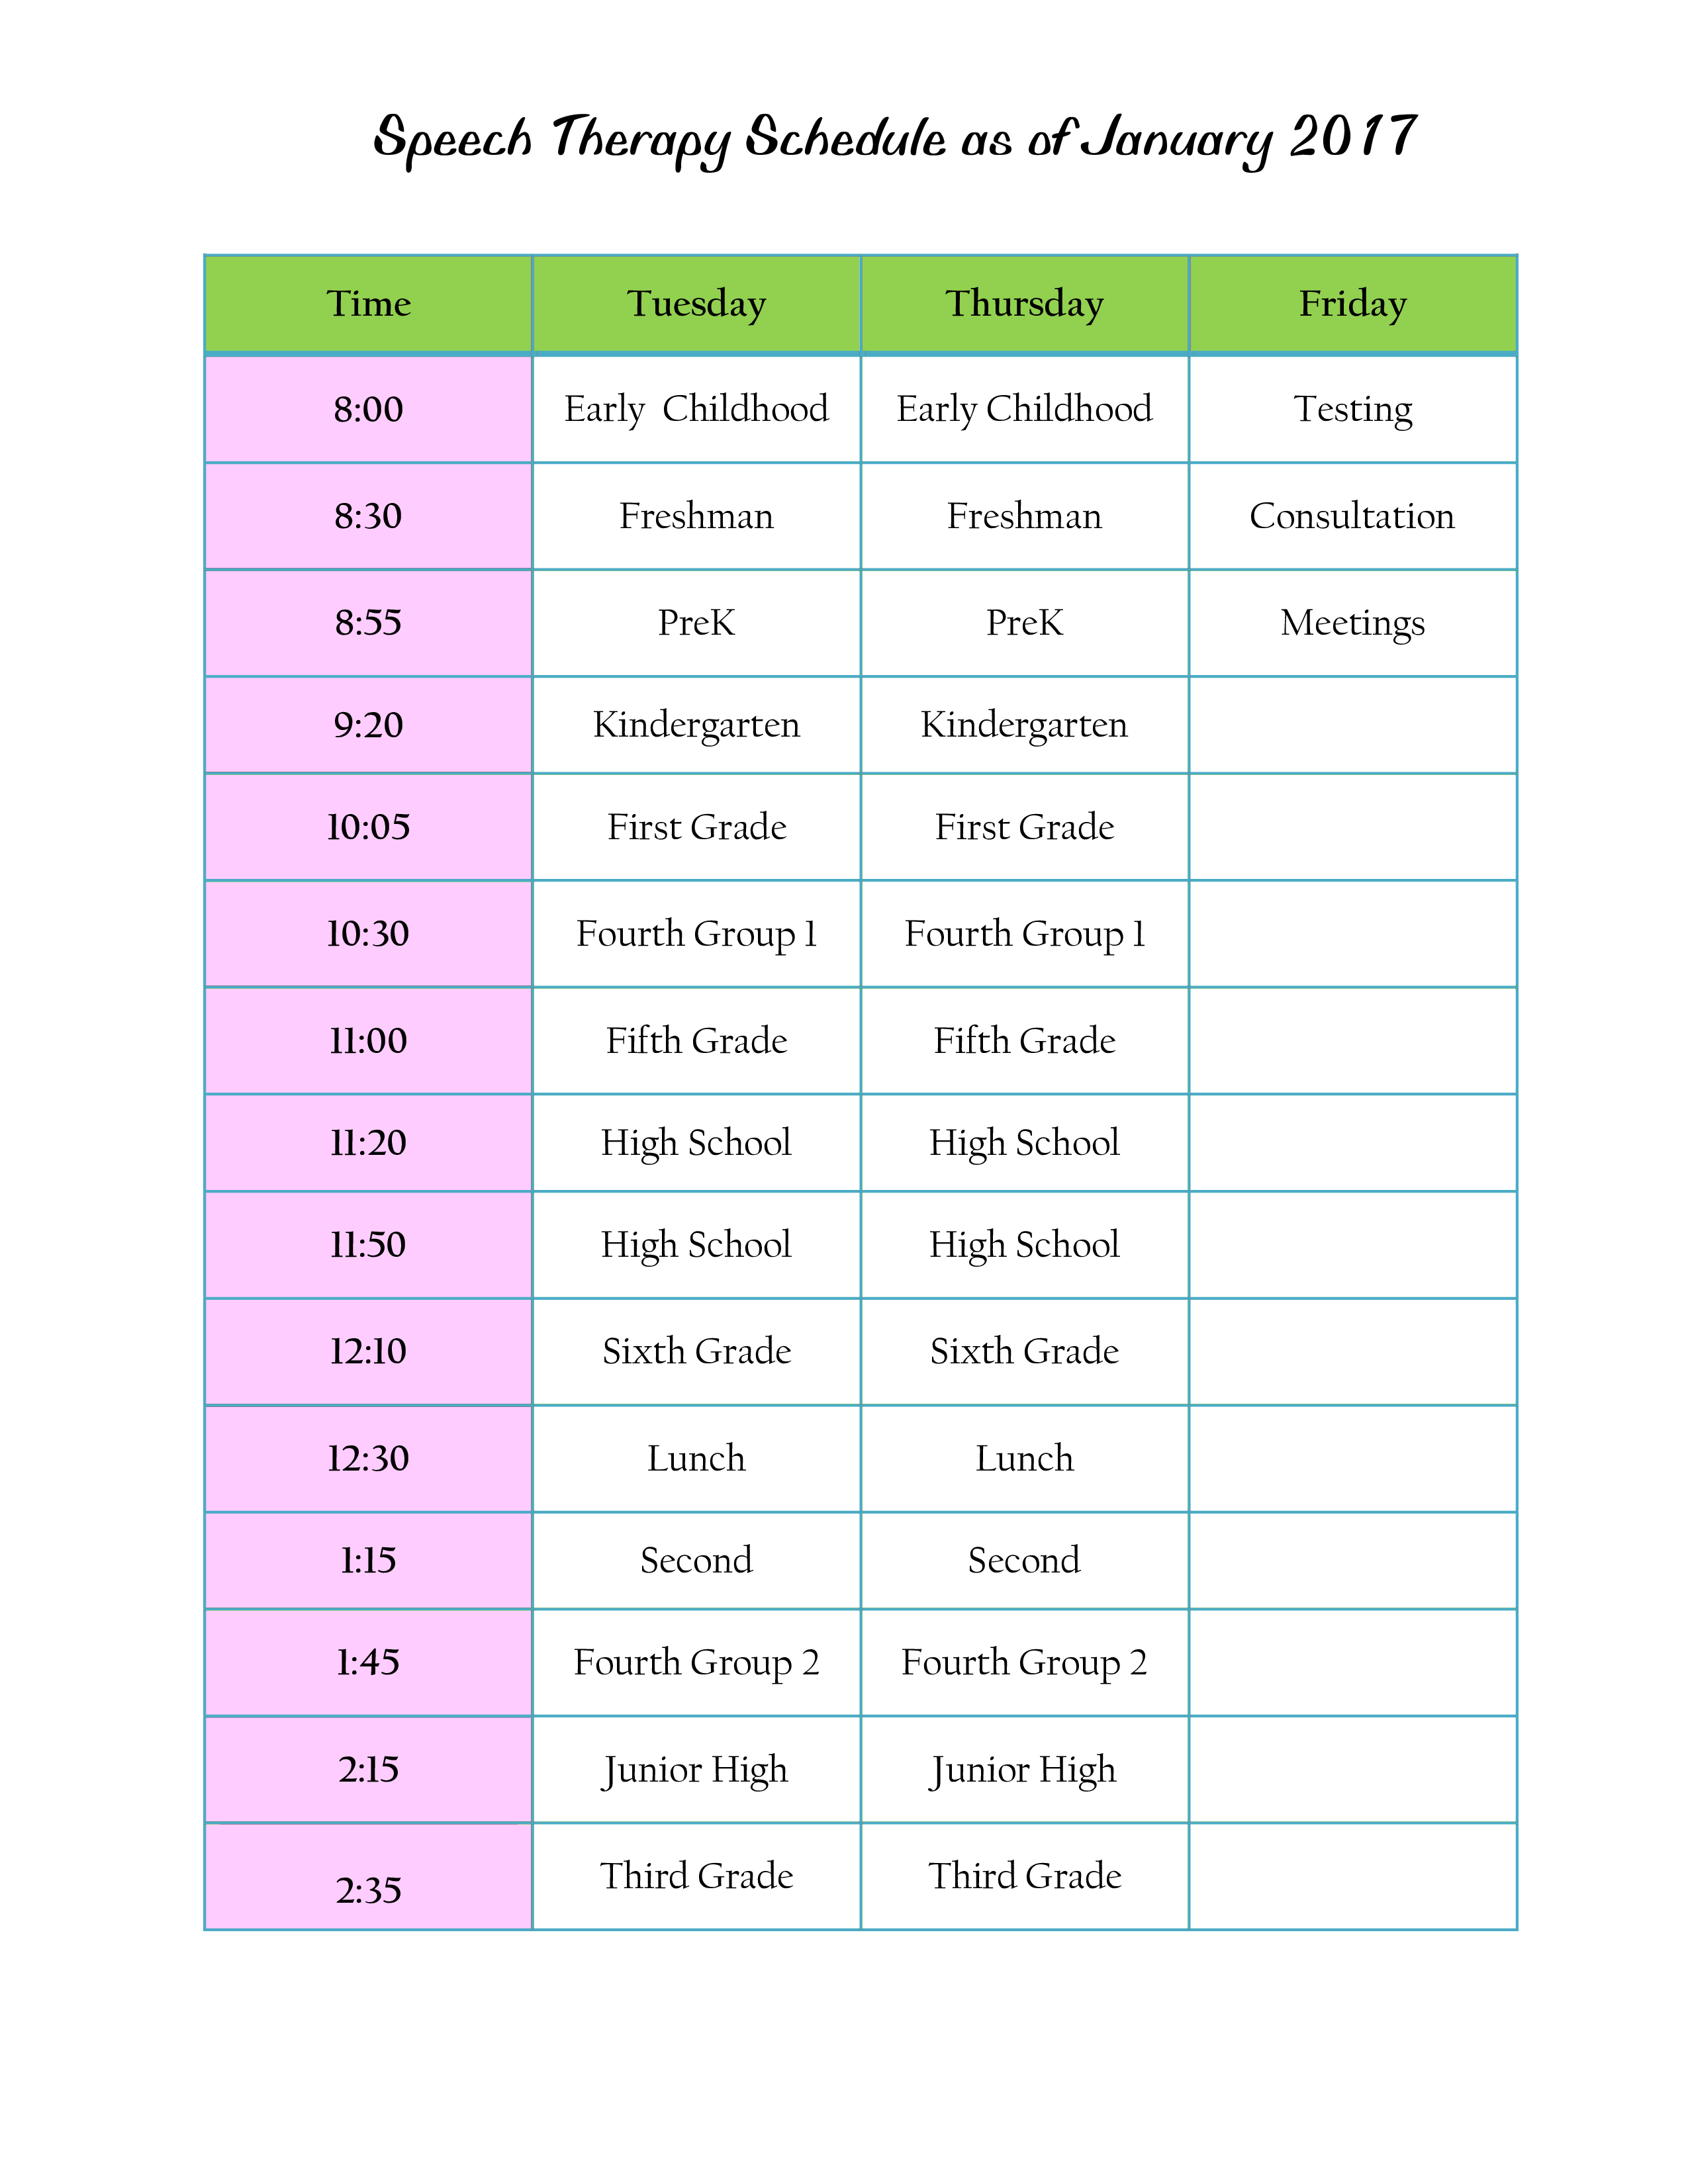 Speech Therapy Schedule main image